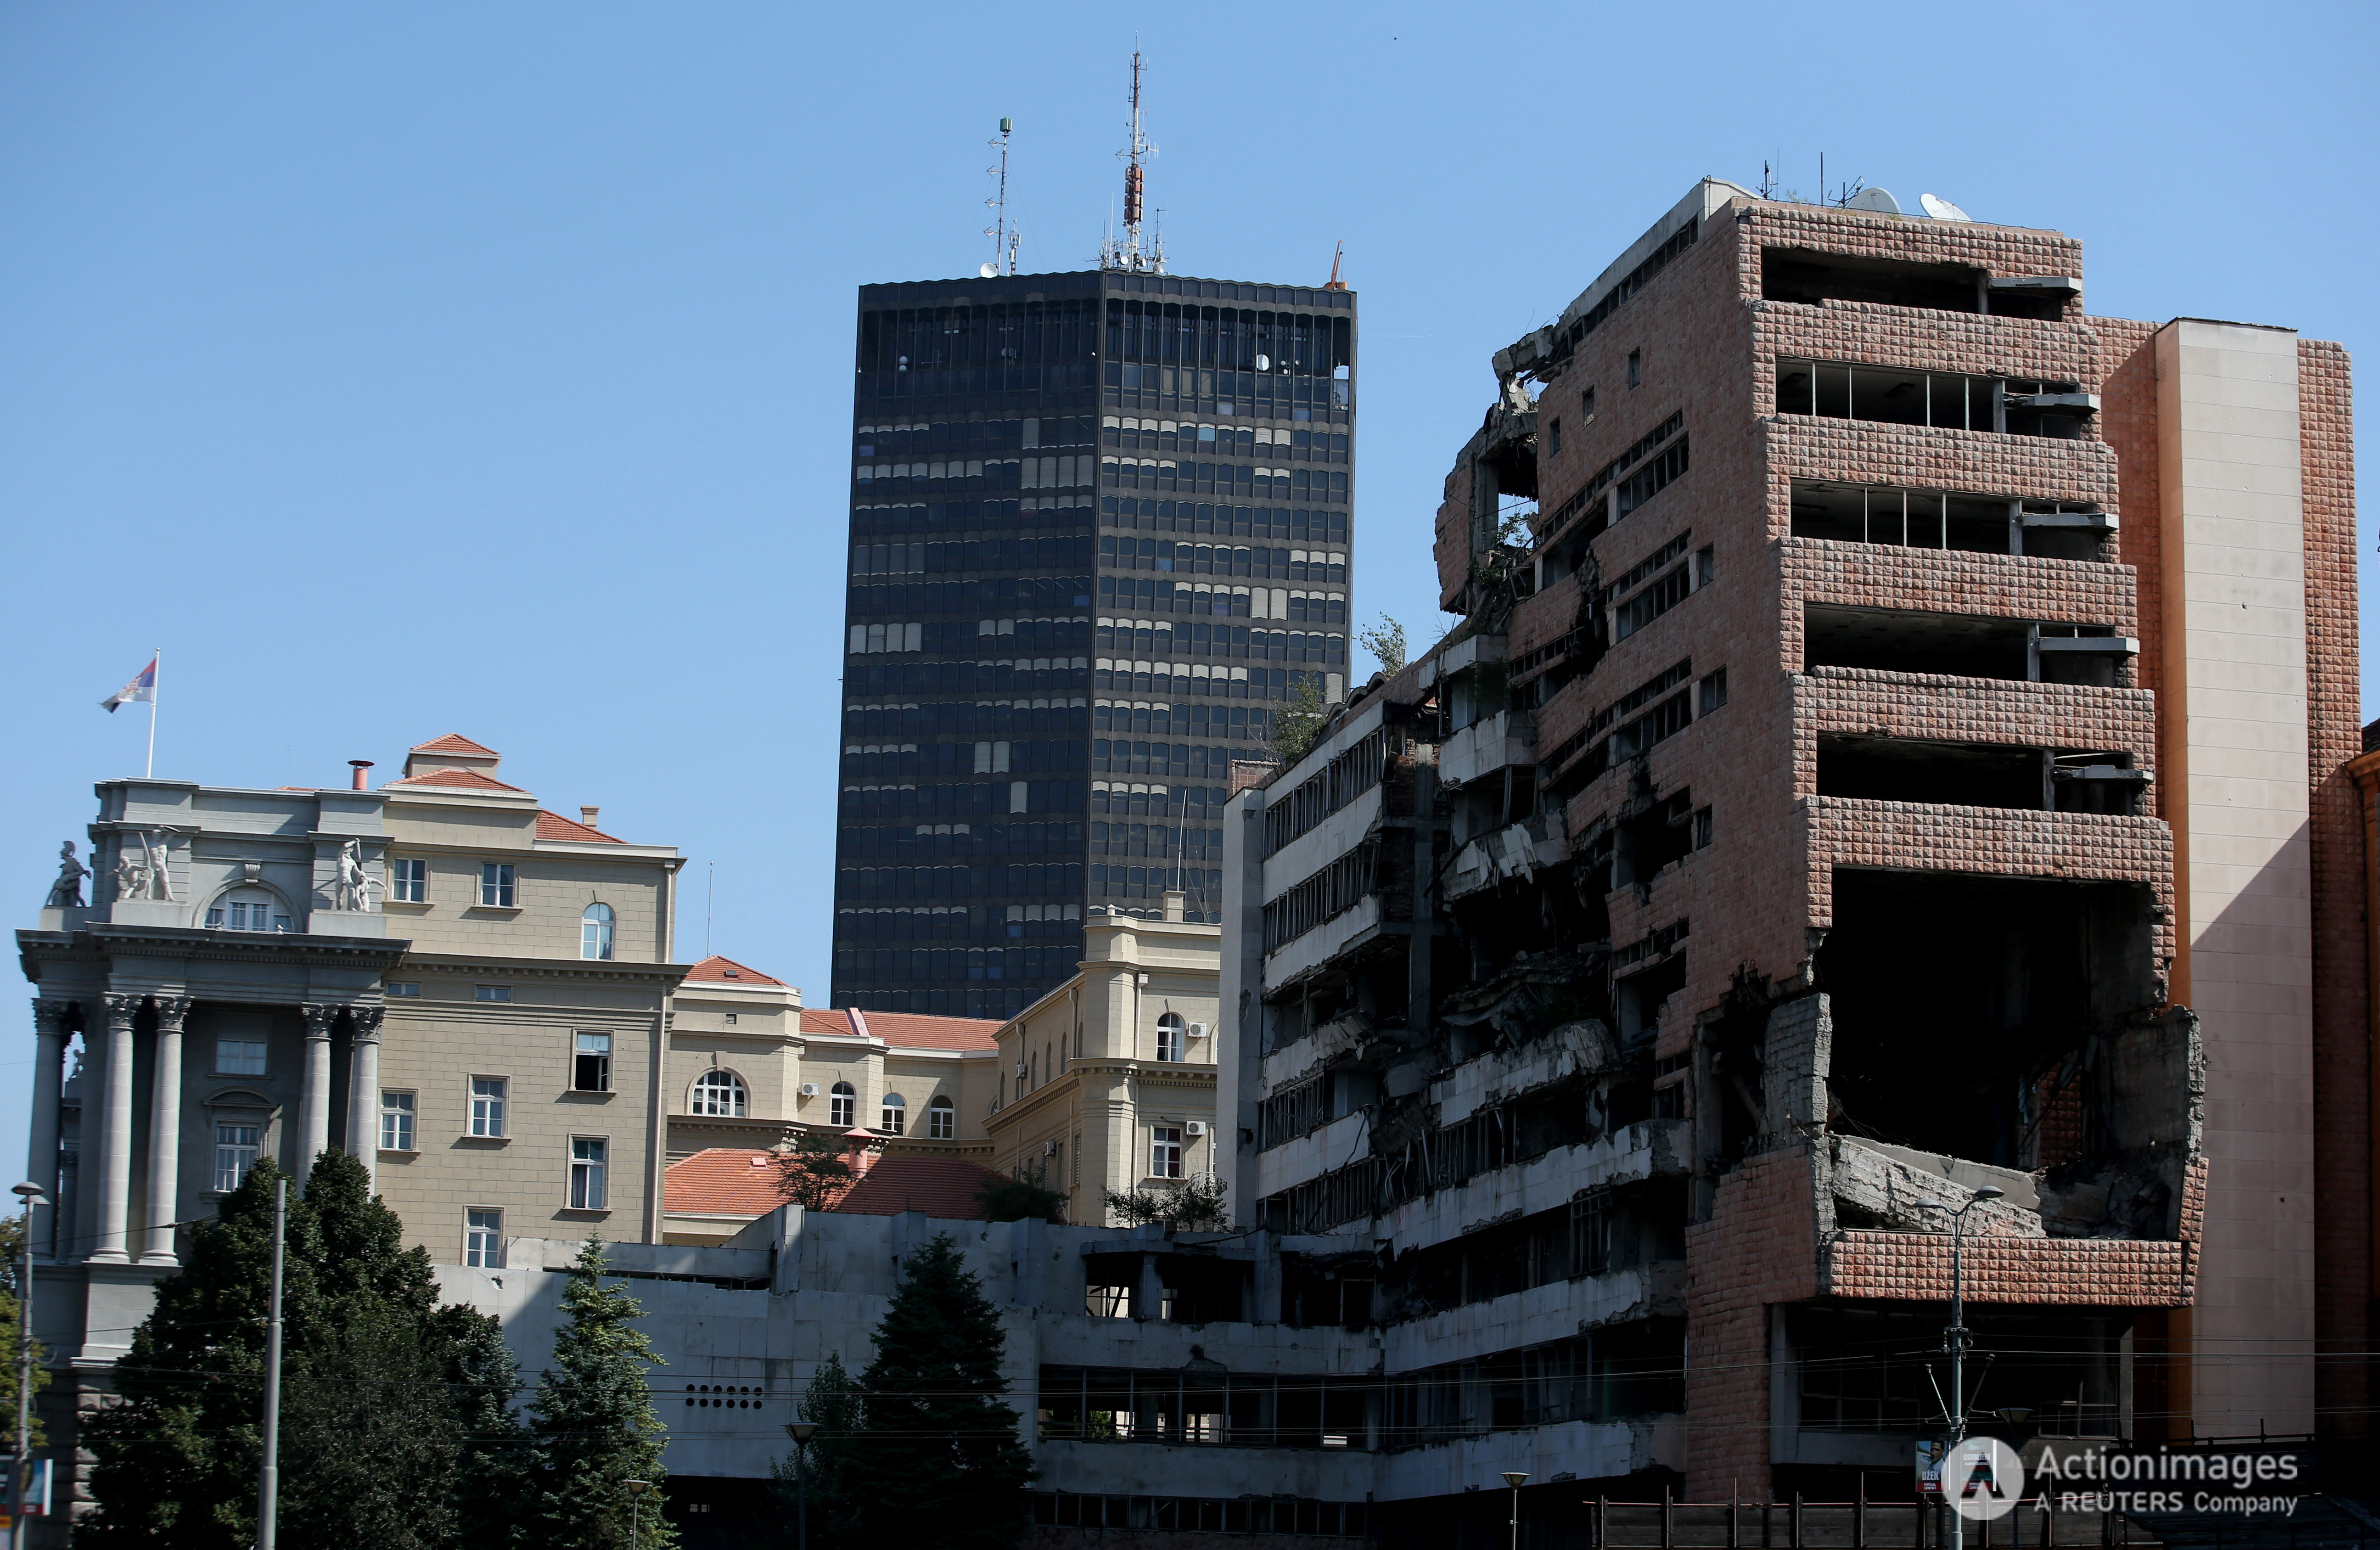 Ministry of defense building in Belgrade damaged during the 1999 NATO